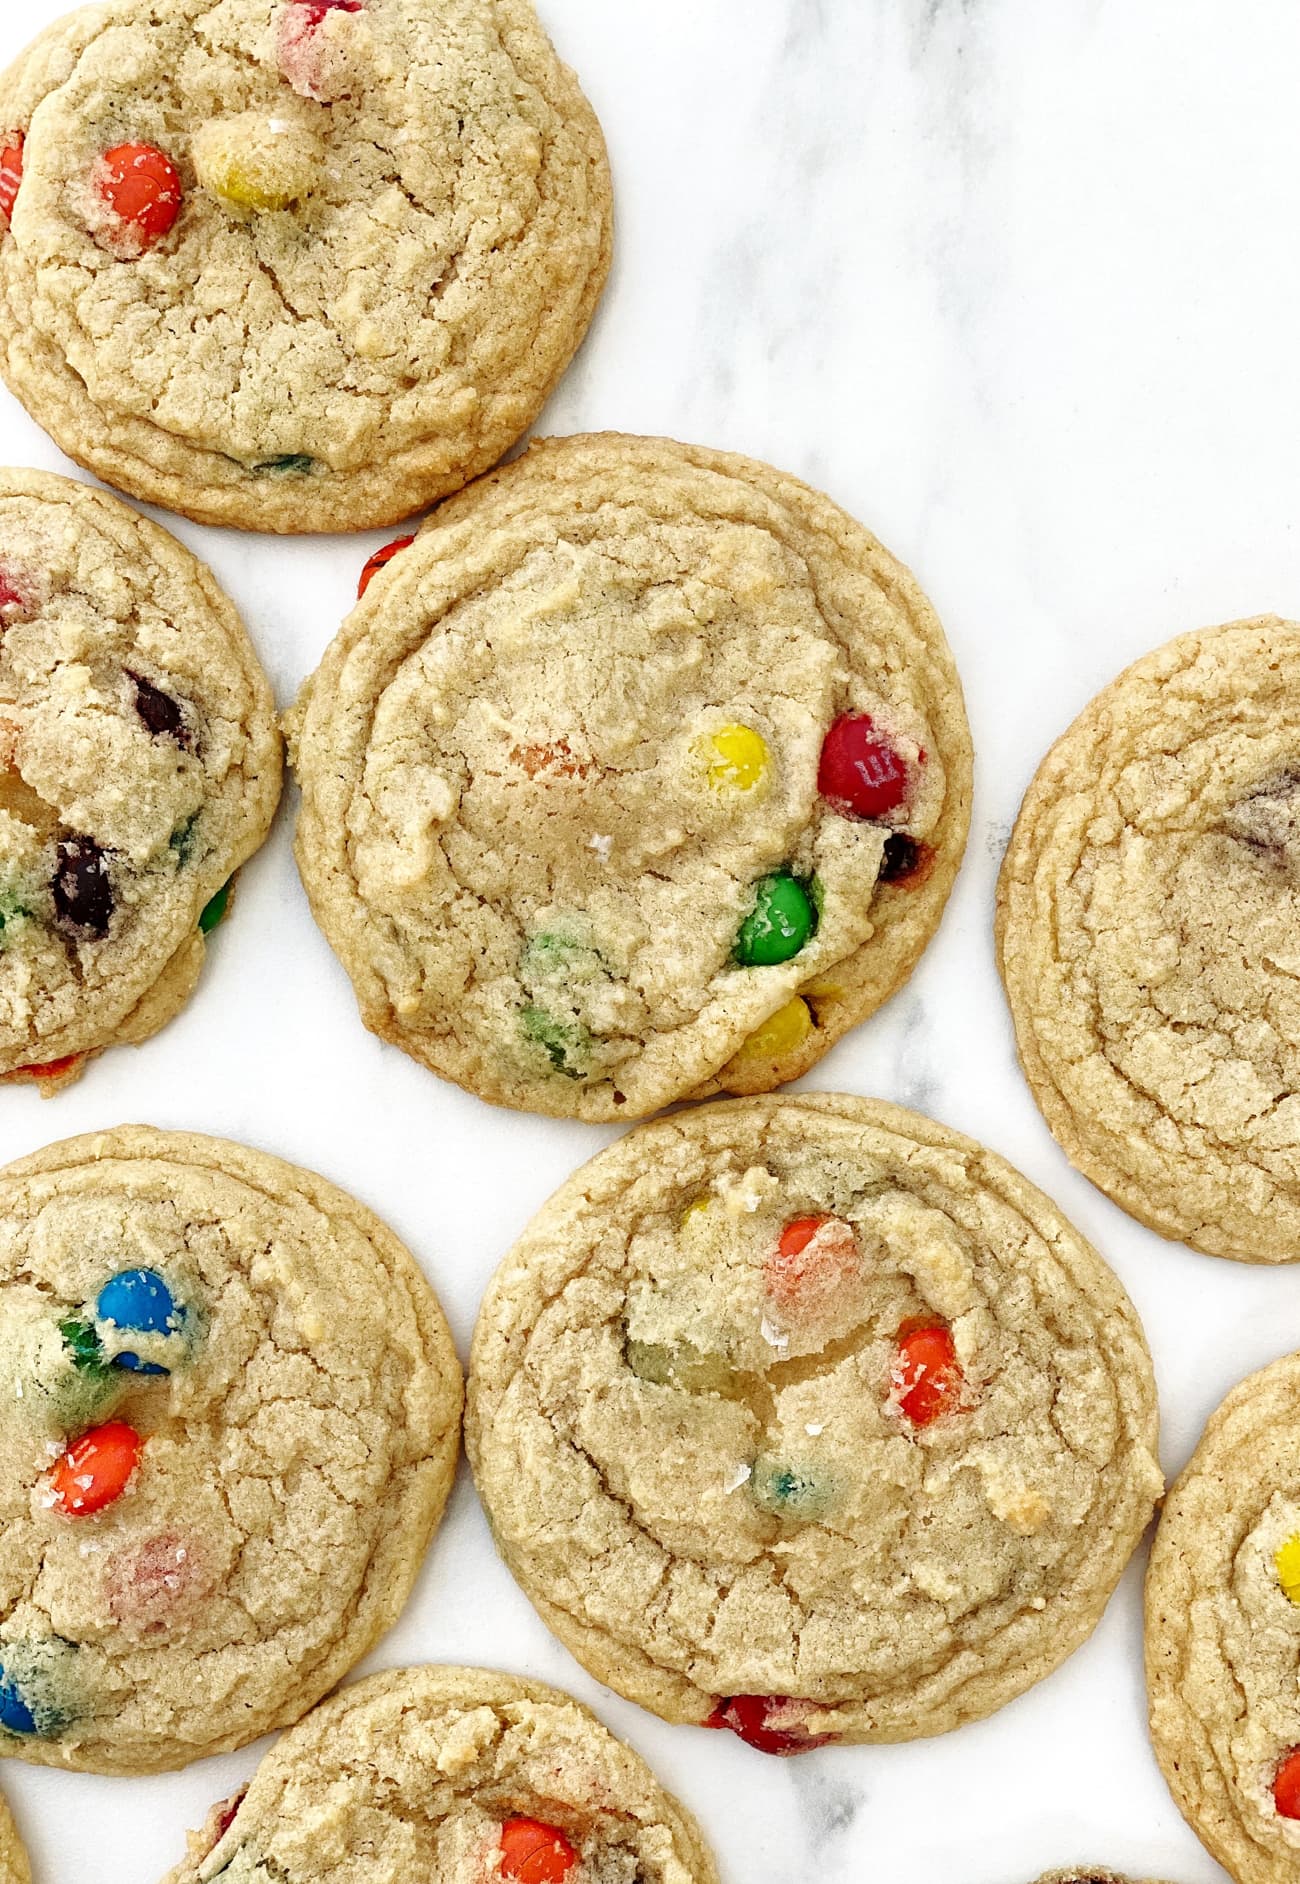 Chocolate Chip M&M Cookies Recipe - Cookies for Days